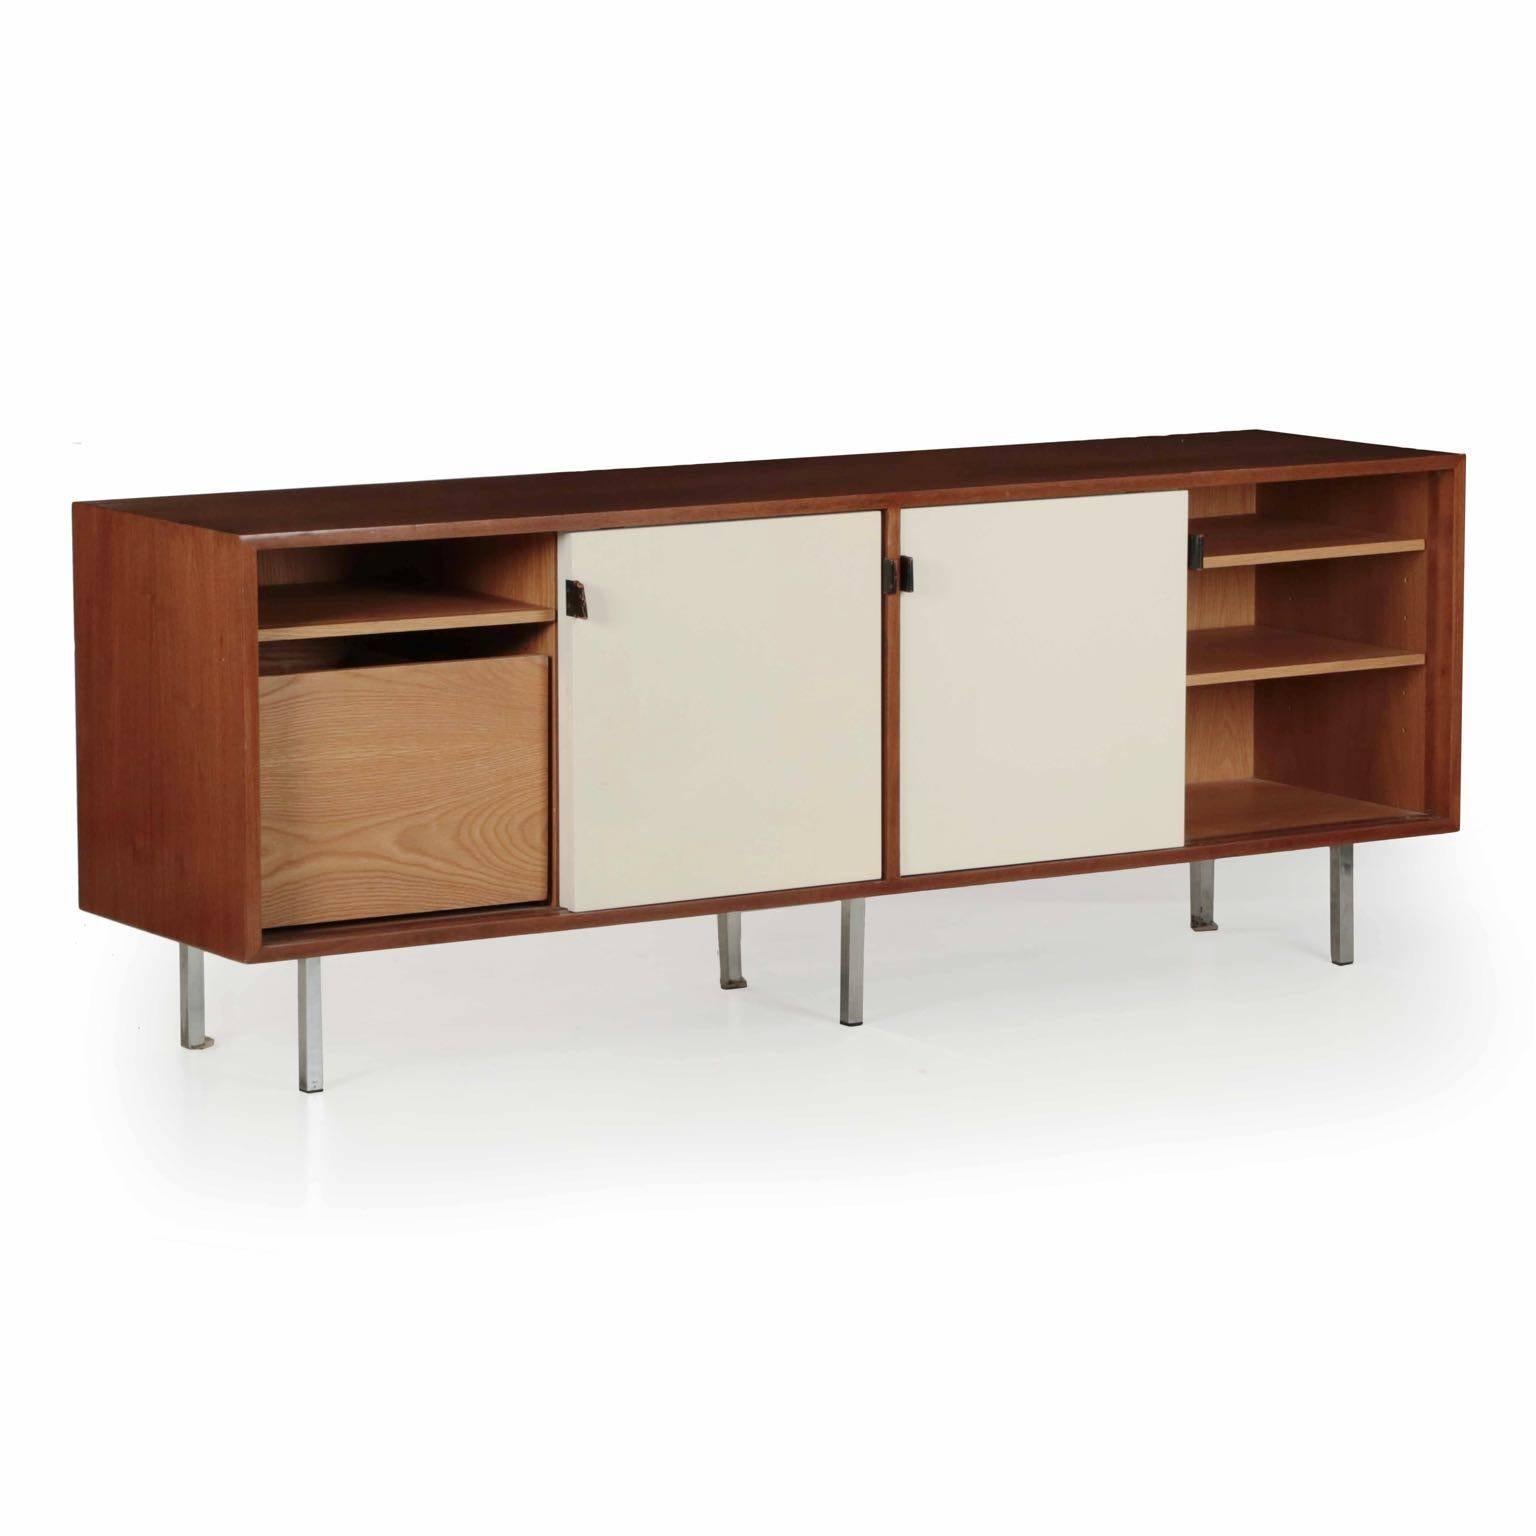 Mid-Century Modern Florence Knoll Walnut and White Laminate Credenza Sideboard Cabinet, circa 1955